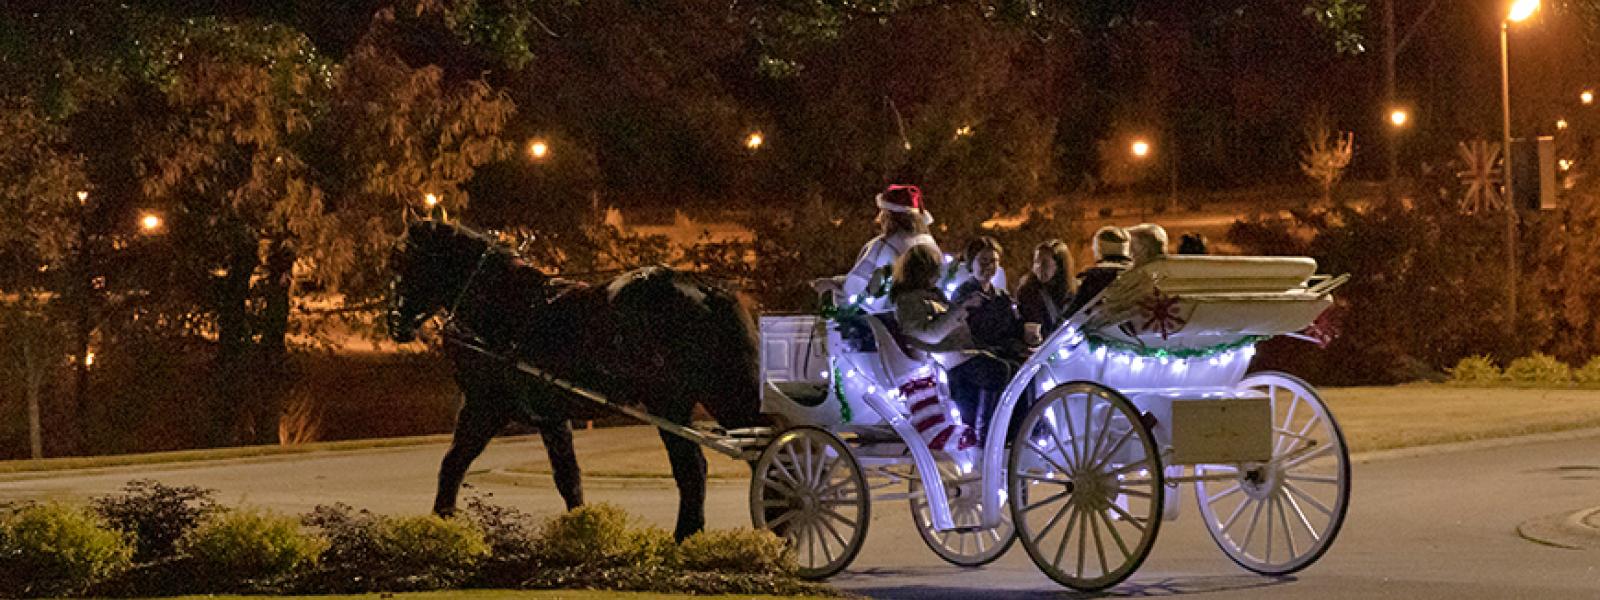 A horse-drawn carriage offers Christmas rides at CIU.  